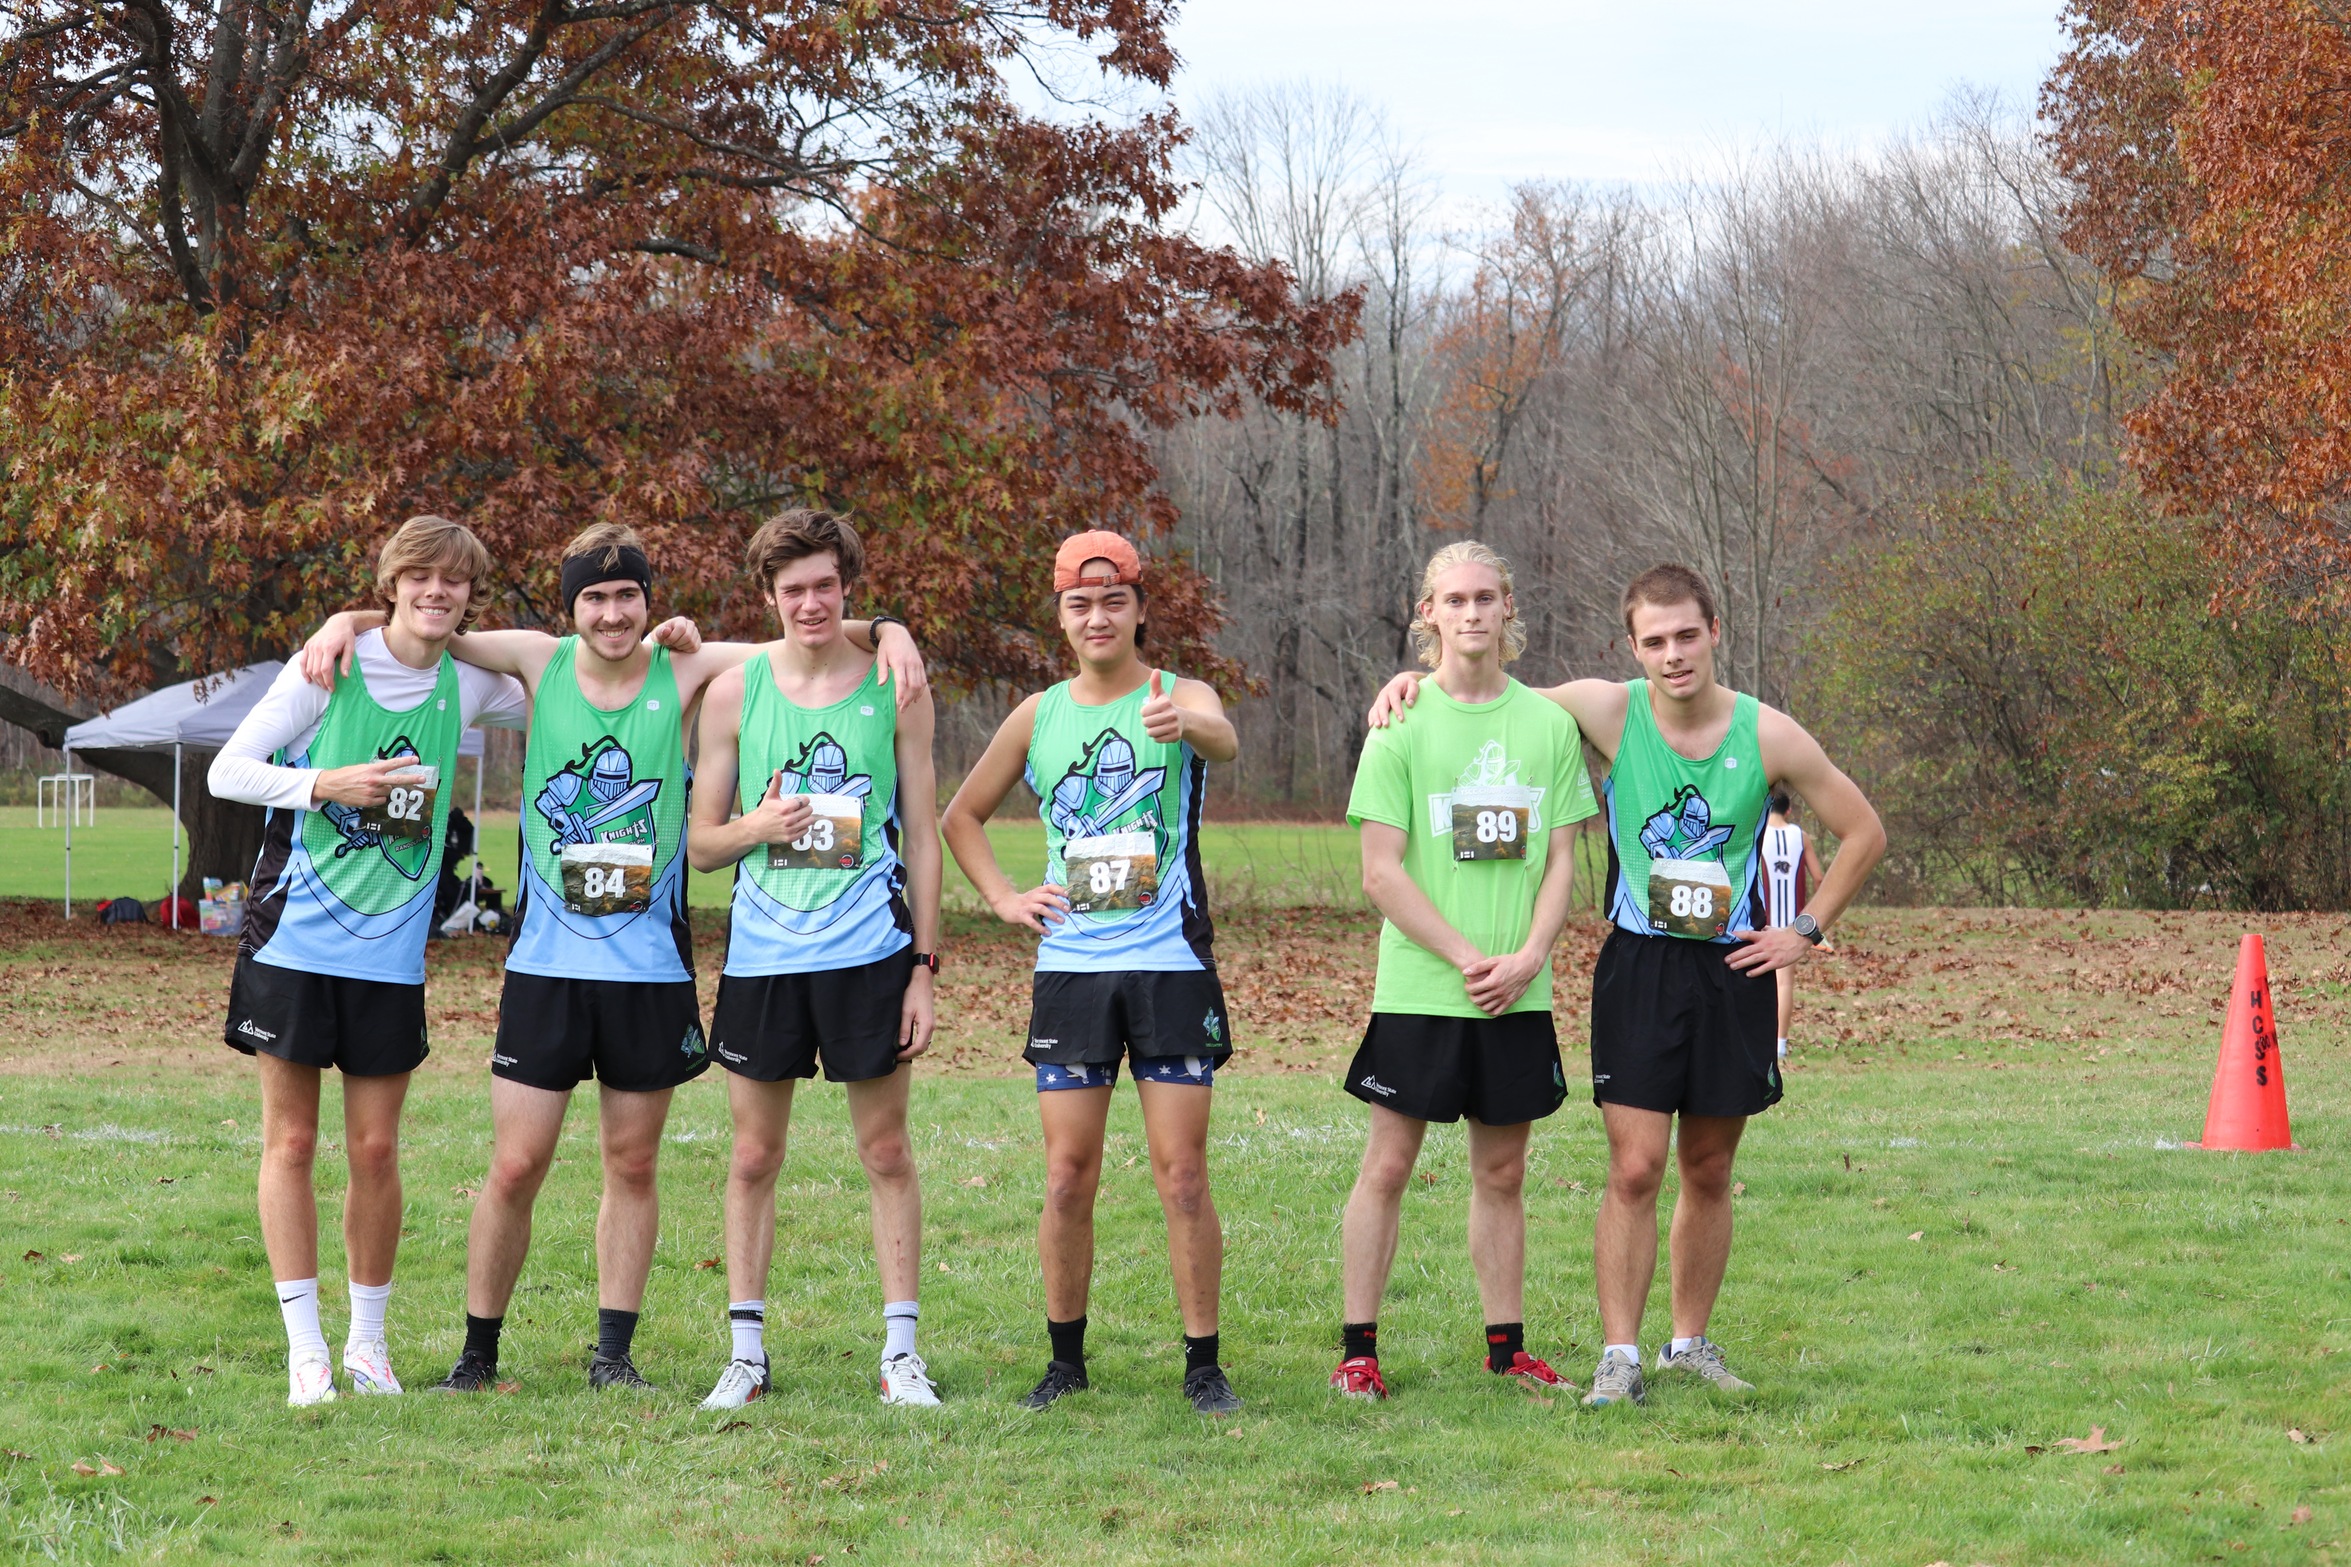 Knights' Norman Benoit takes 3rd, Team 2nd at Men's YSCC Cross Country Championship